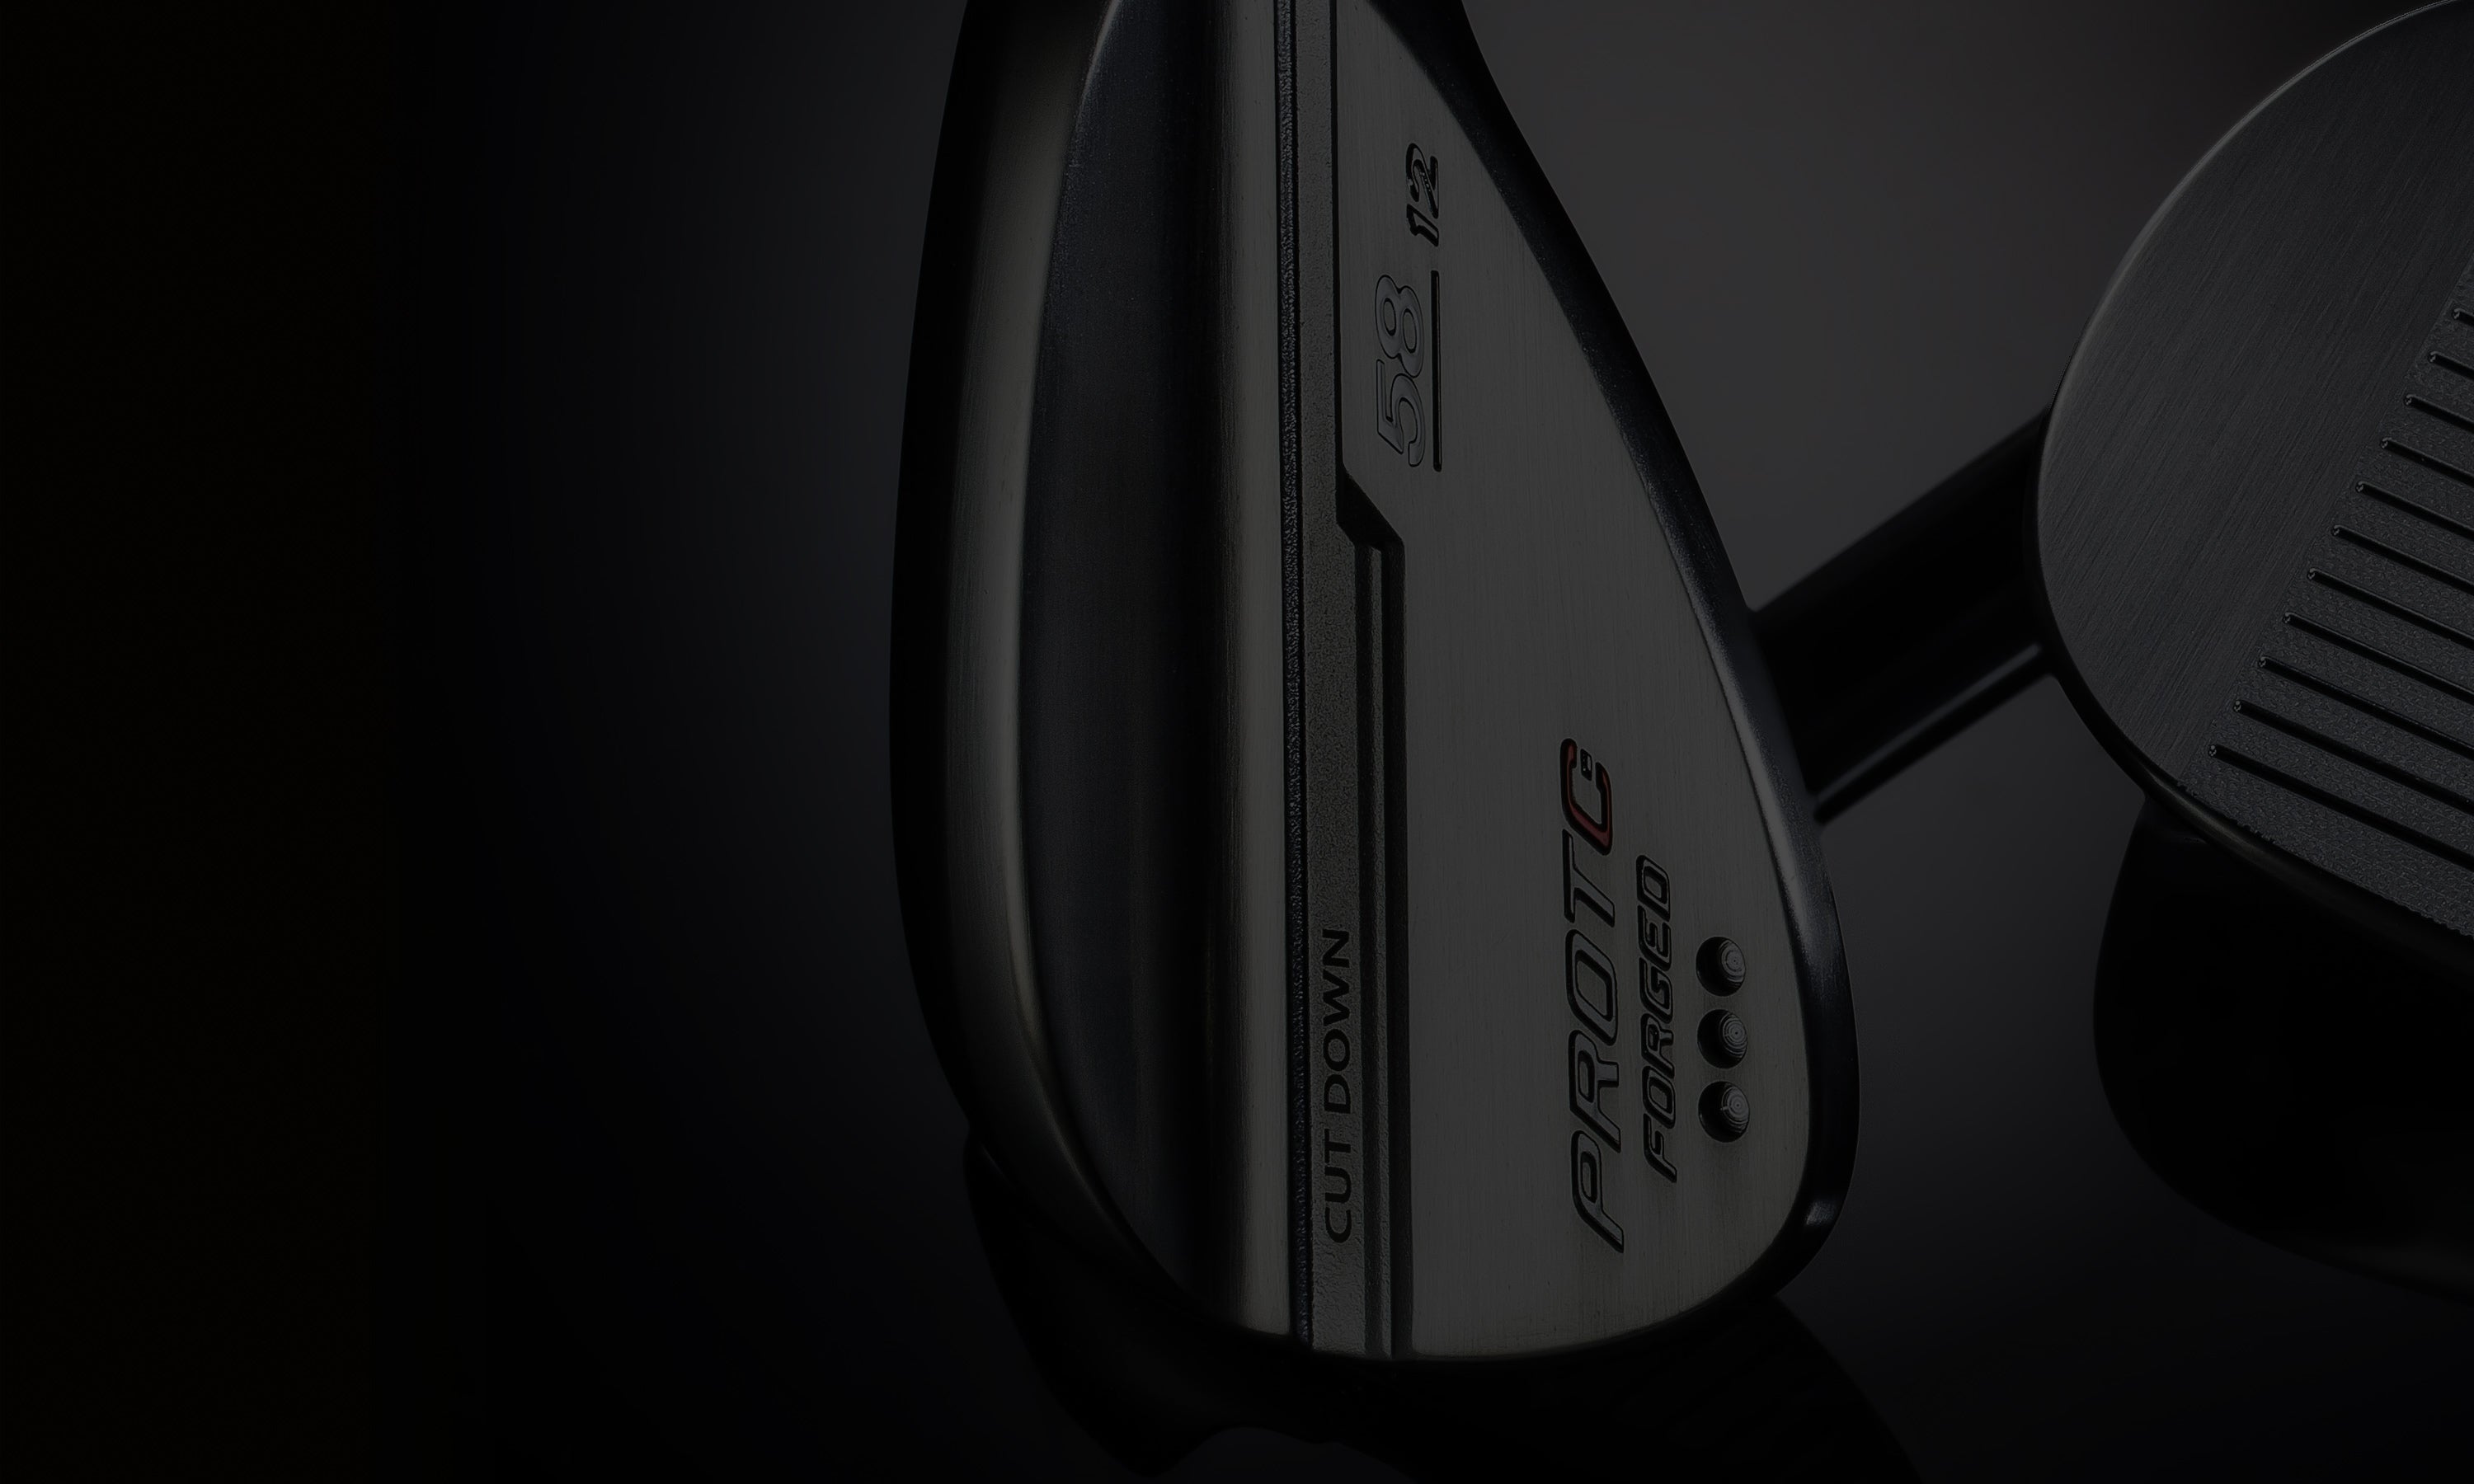 PROTOCONCEPT Golf, Protoconcept Wedge, Golf Wedge, Forged wedge, wedge texhnology